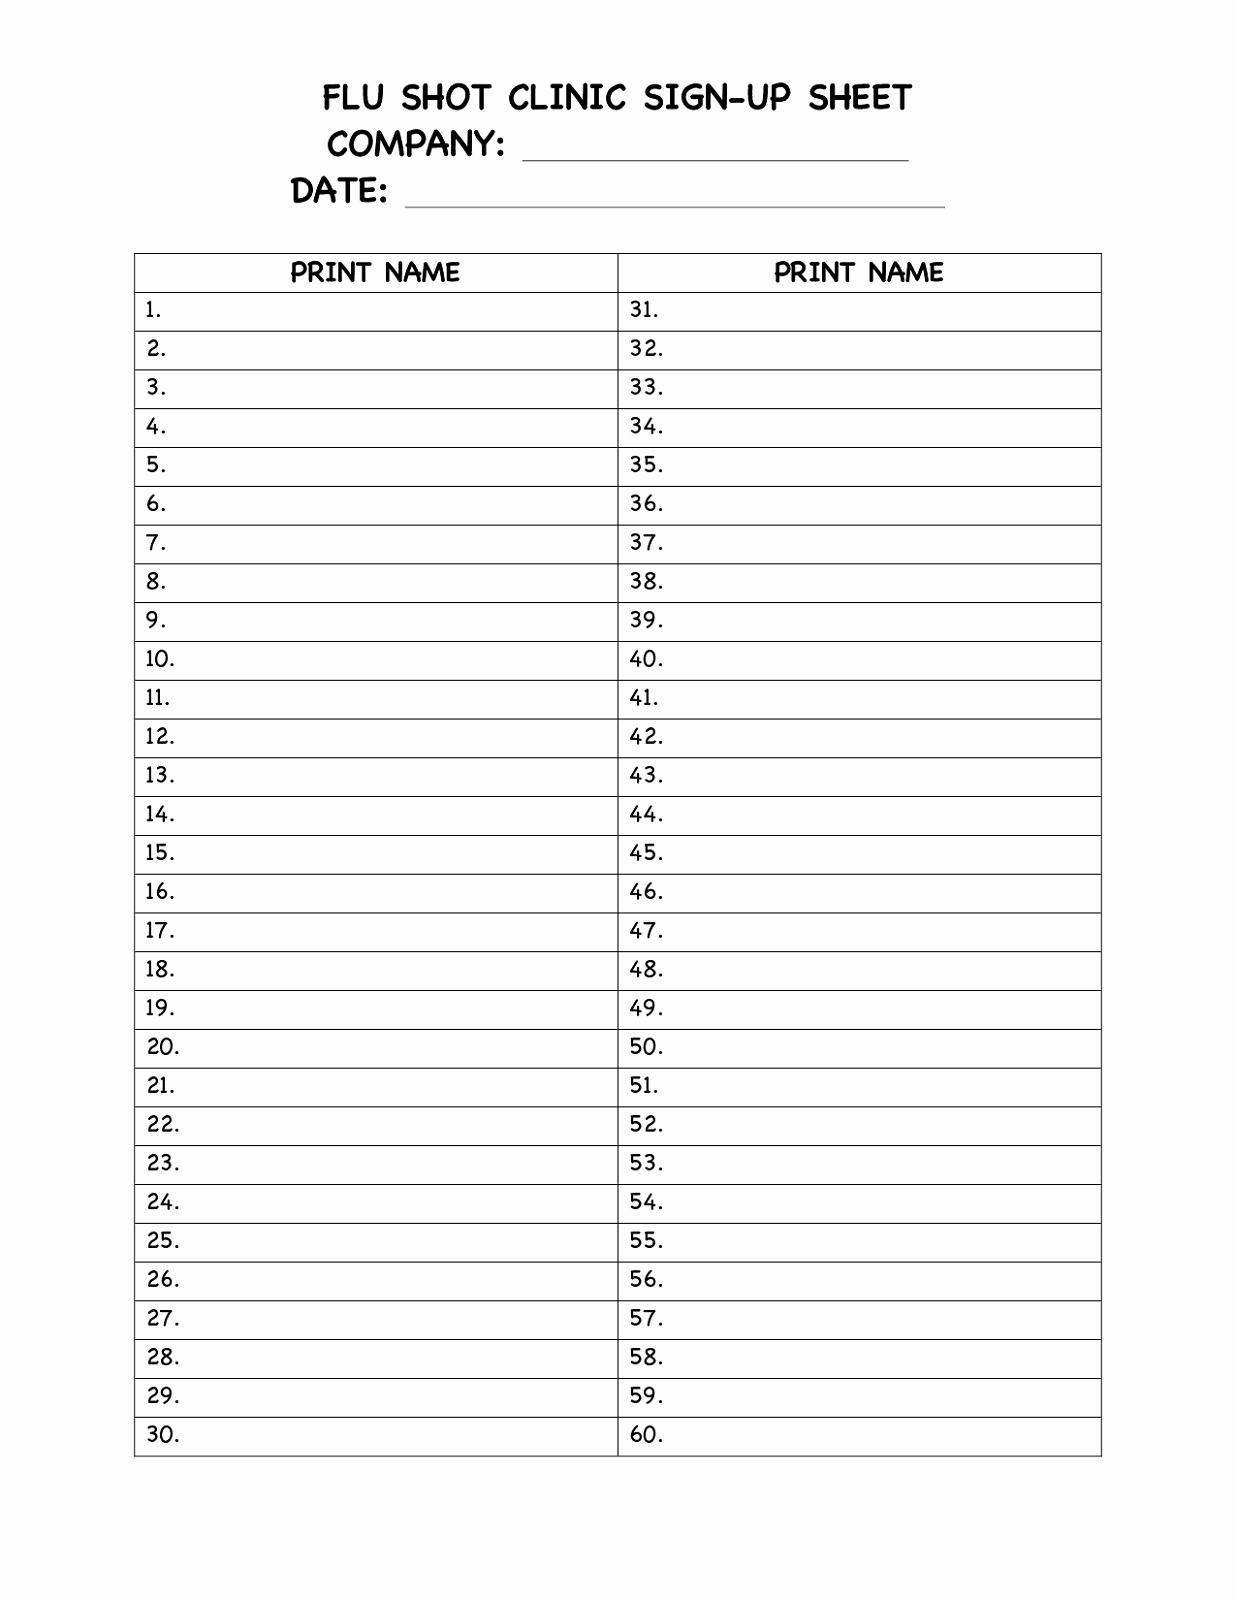 Christmas Potluck Signup Sheet Template Unique Potluck Sign Up Sheet Word for events